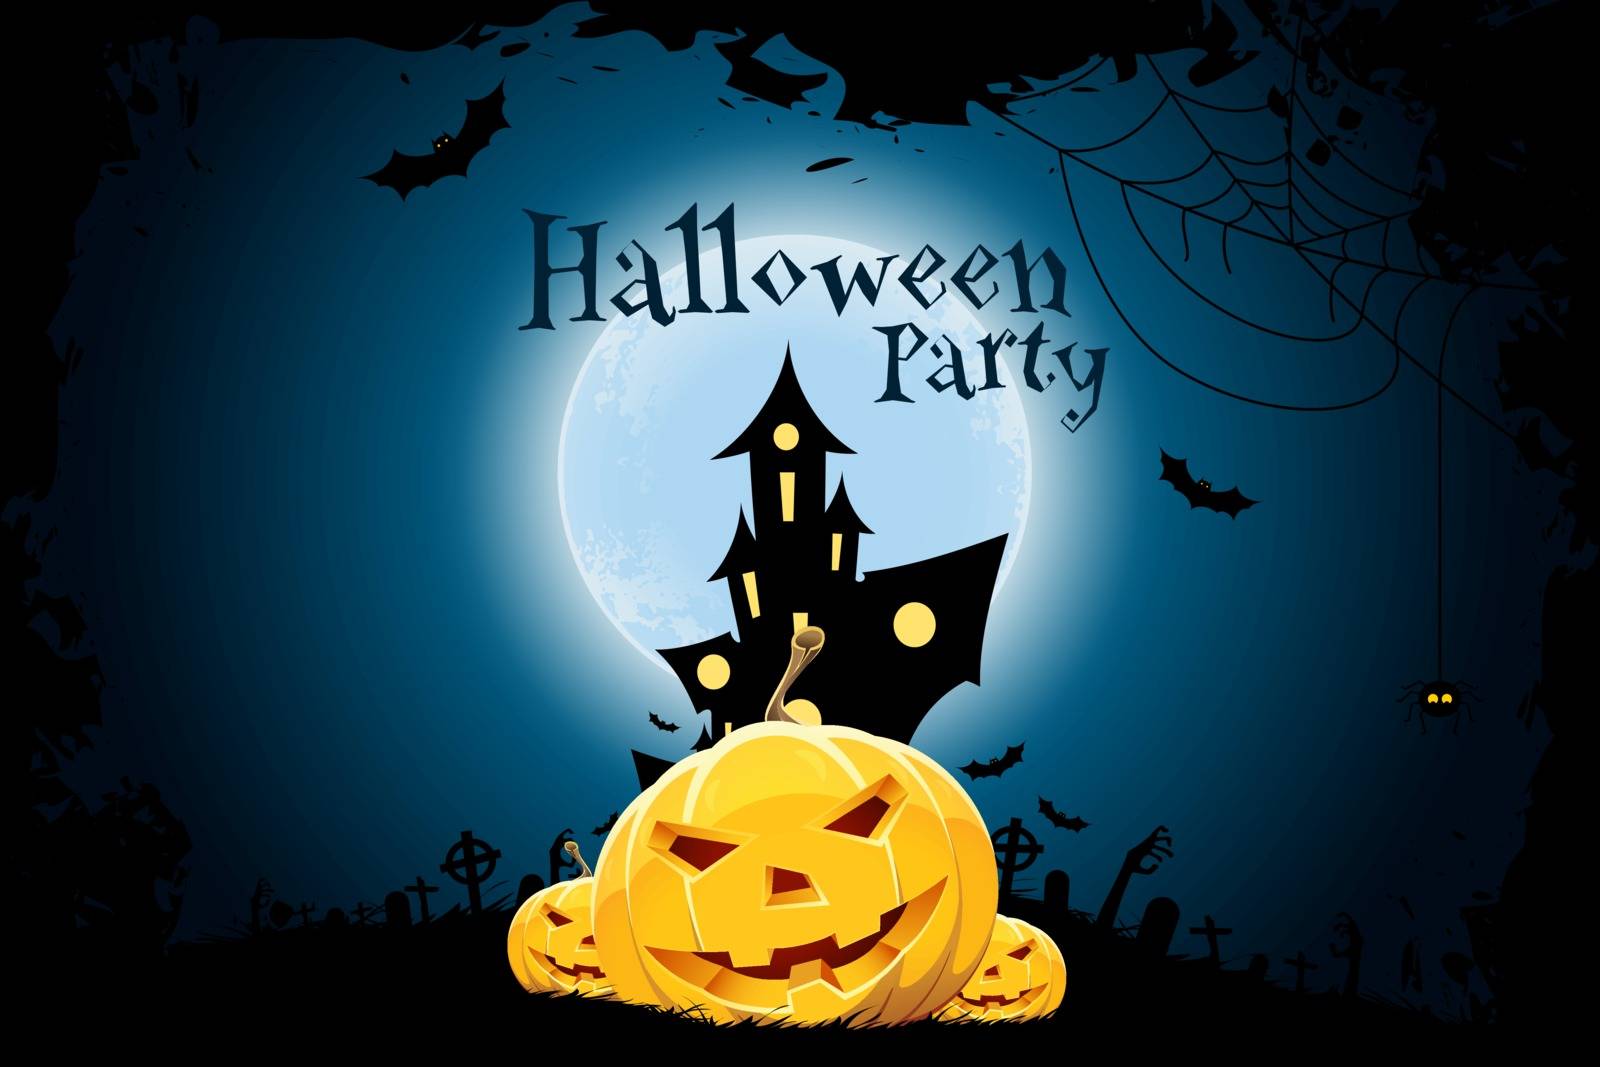 Grungy Halloween Party Background with Haunted House, Pumpkins, Bats, Moon and Spider